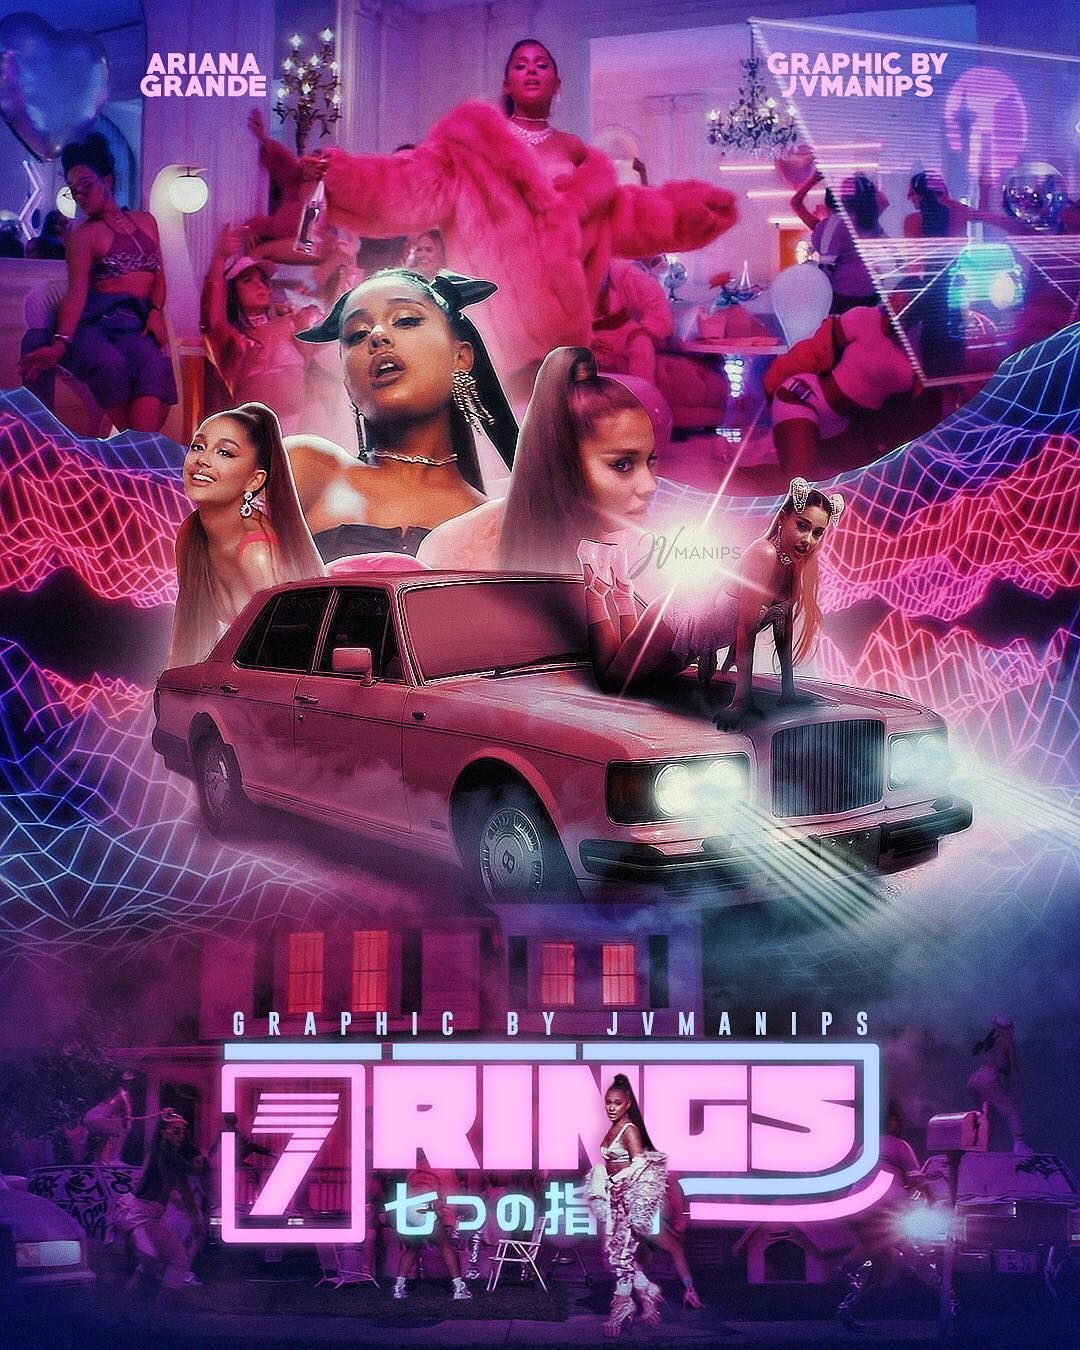 Julia posted on Instagram: “7 rings: the movie